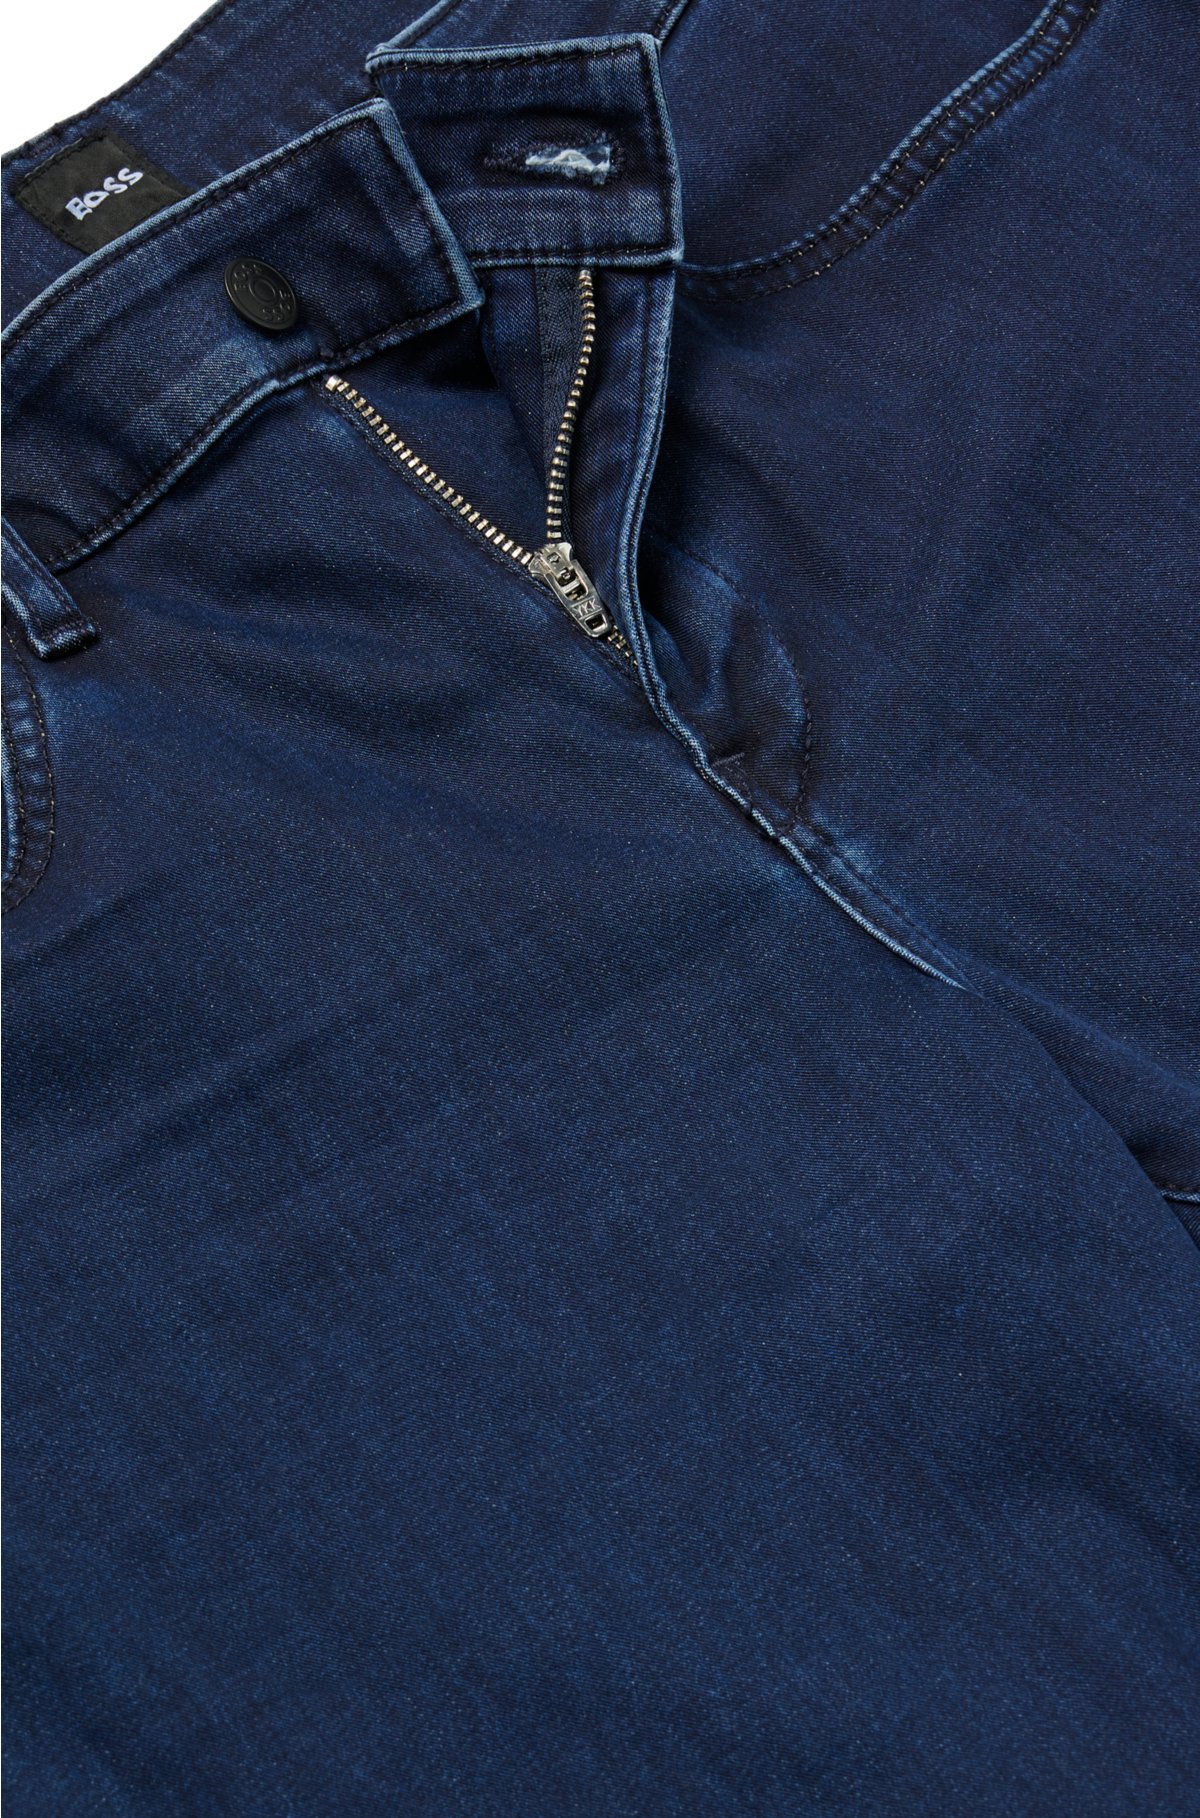 BOSS jeans - Slim-fit denim blue in satin-touch